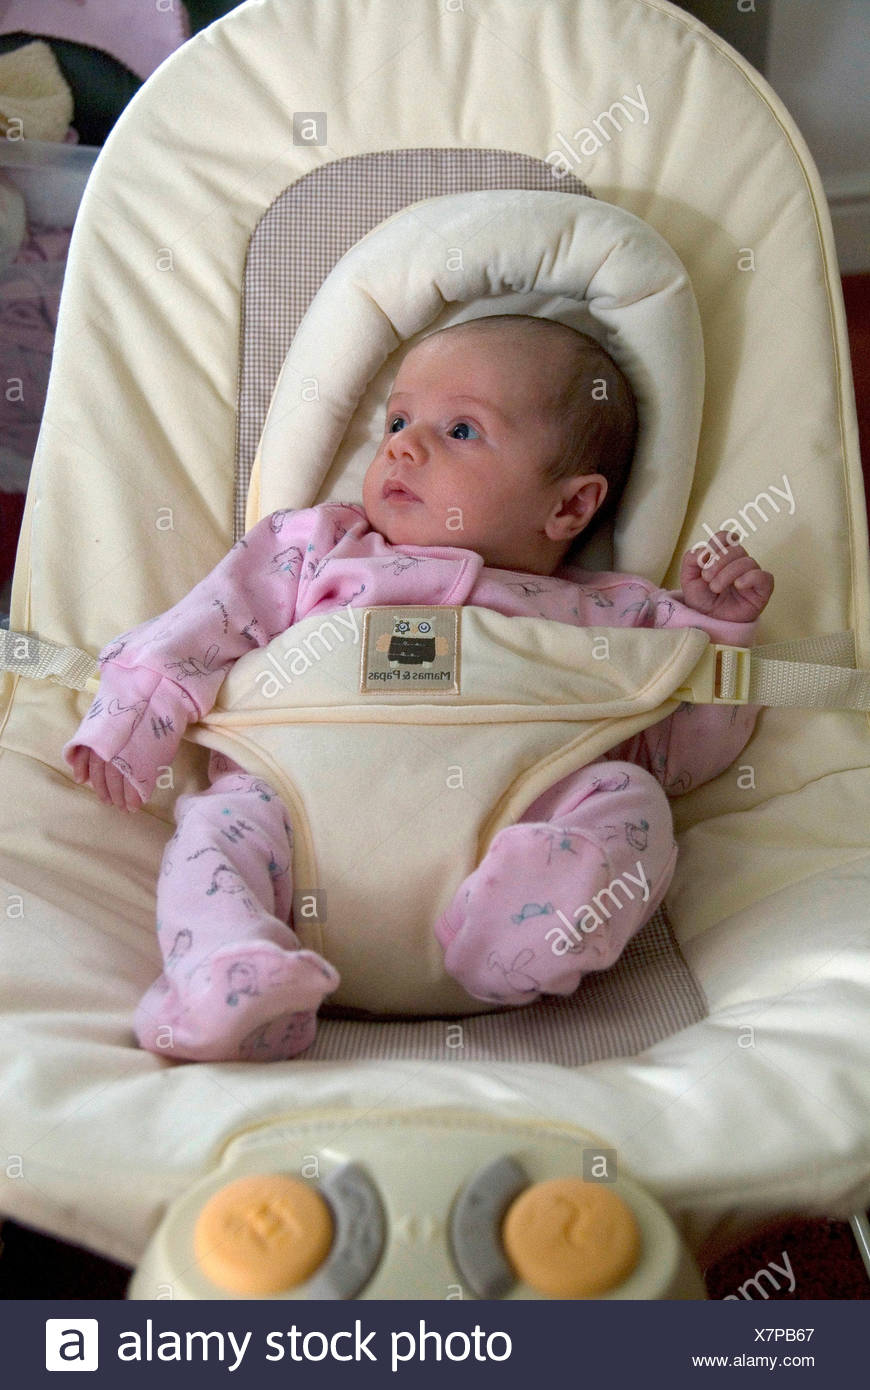 baby bouncer for 6 month old